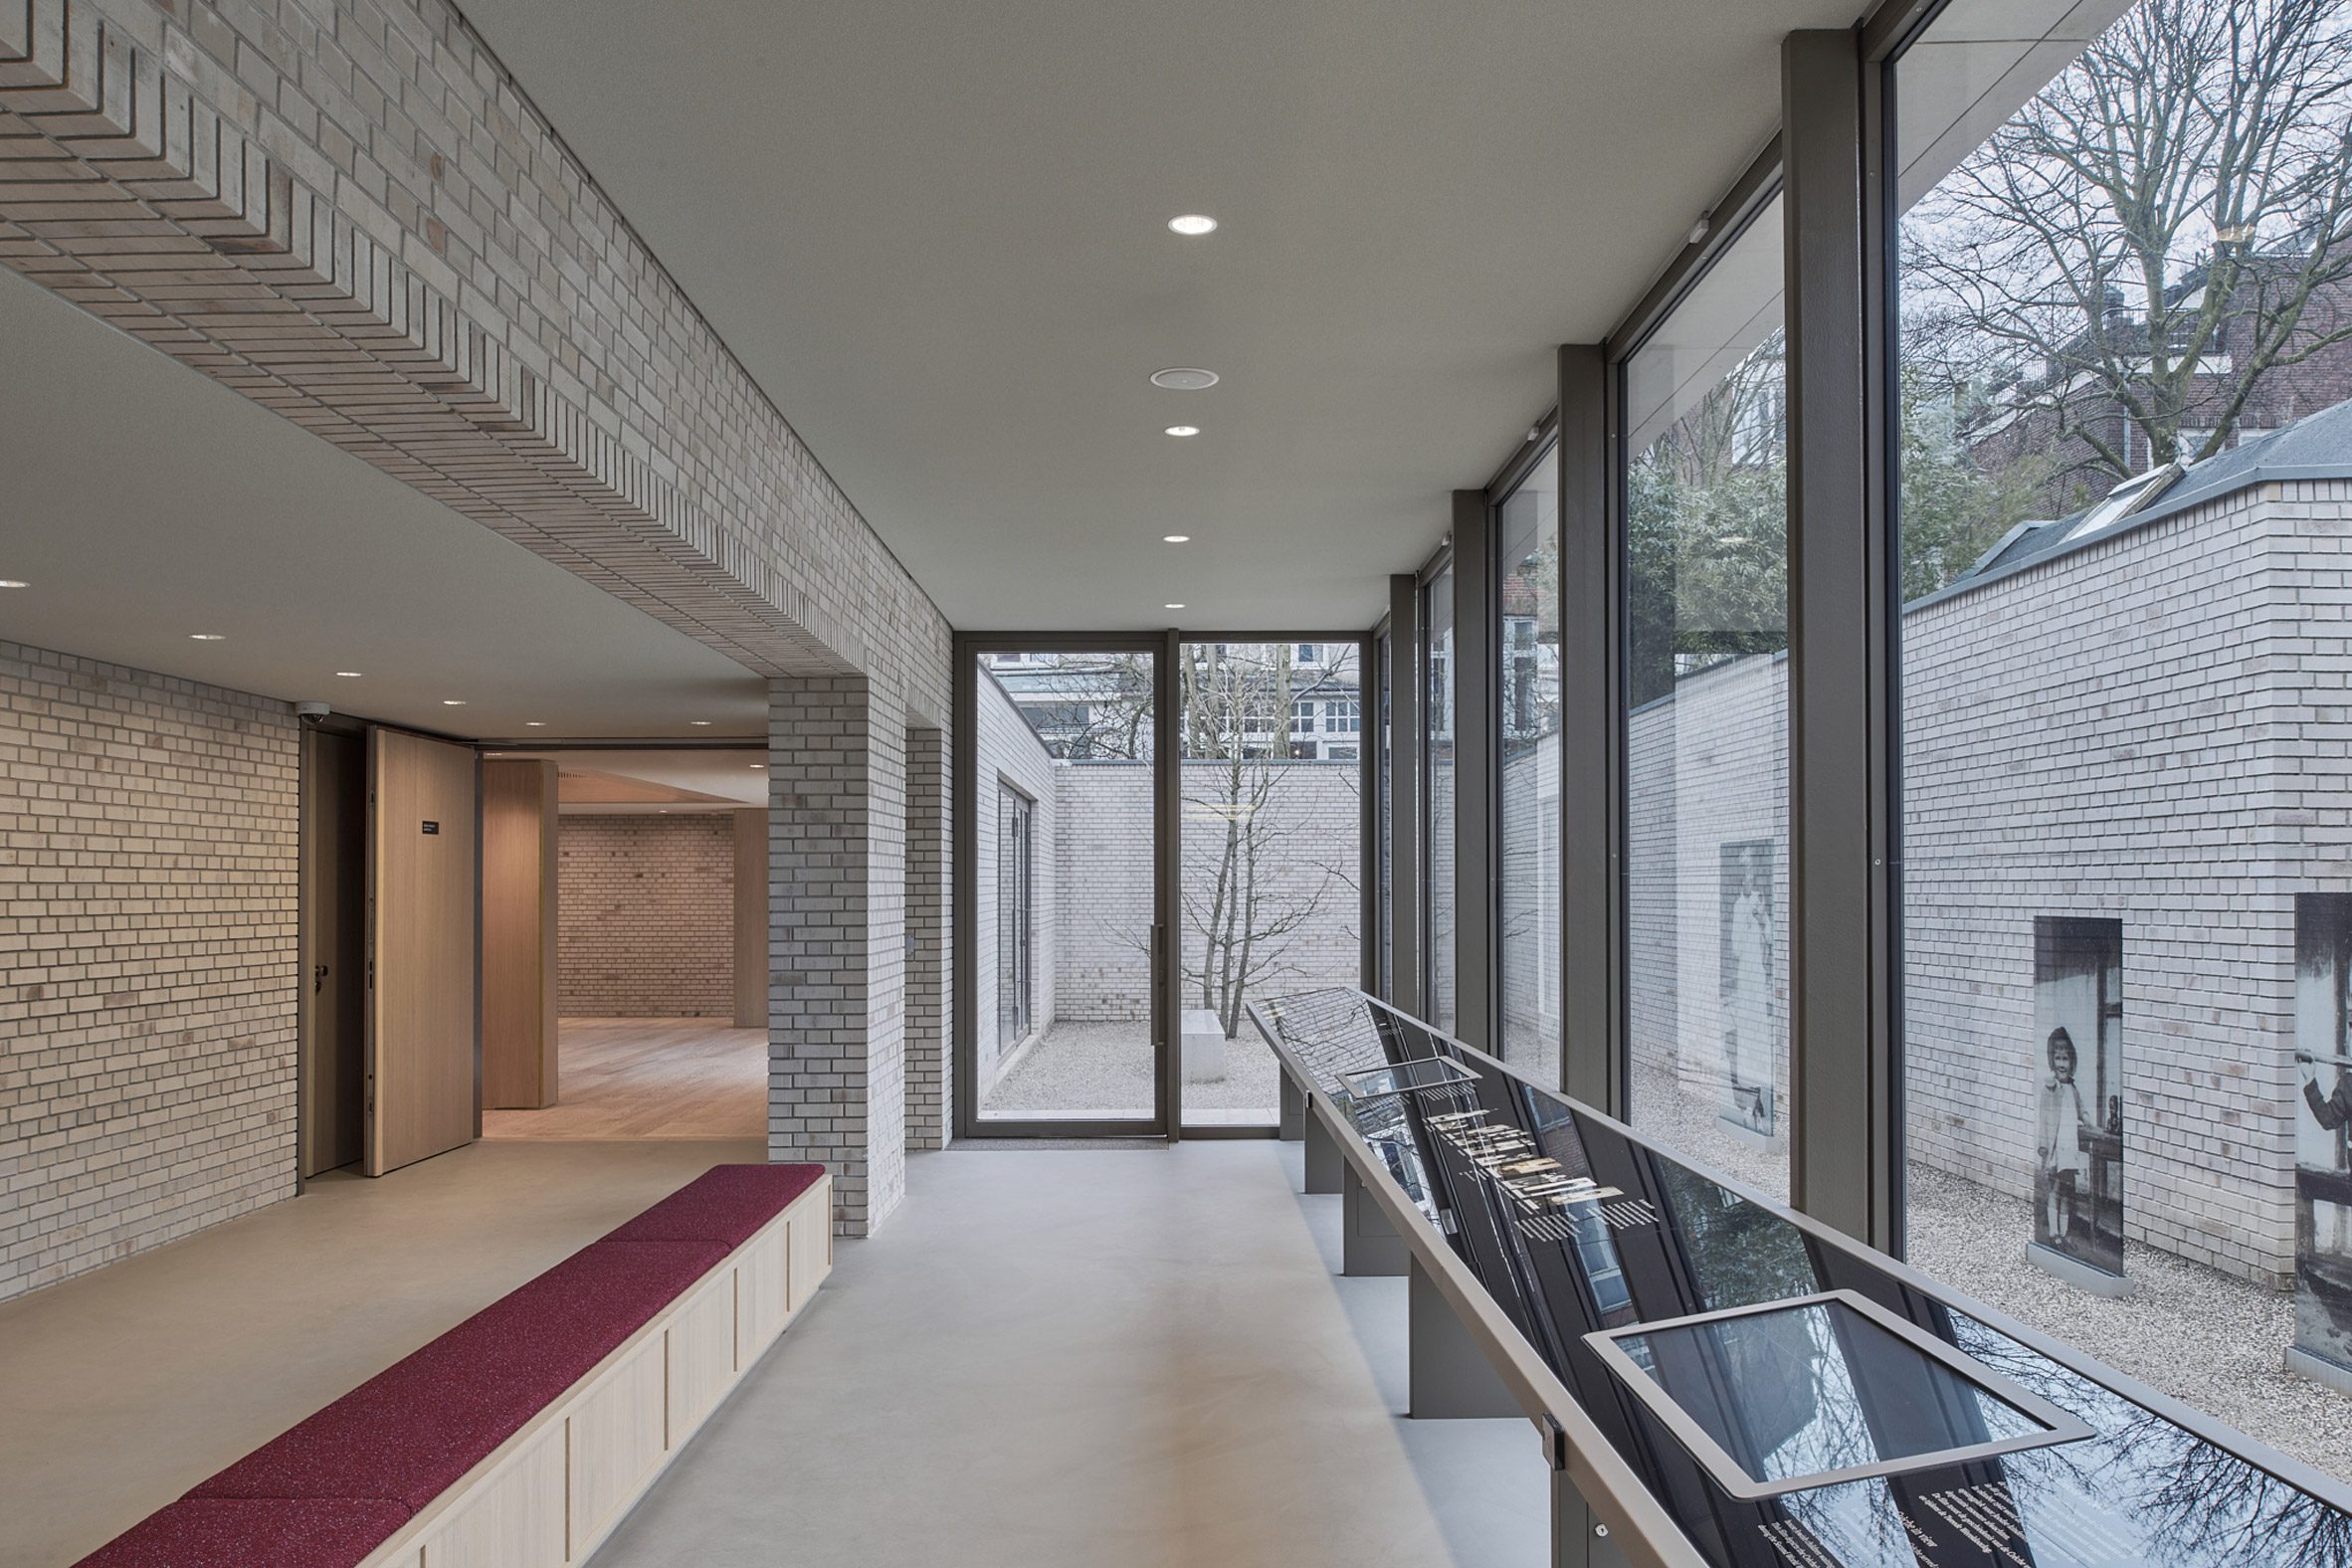 Exhibition space within Amsterdam memorial designed by Office Winhov